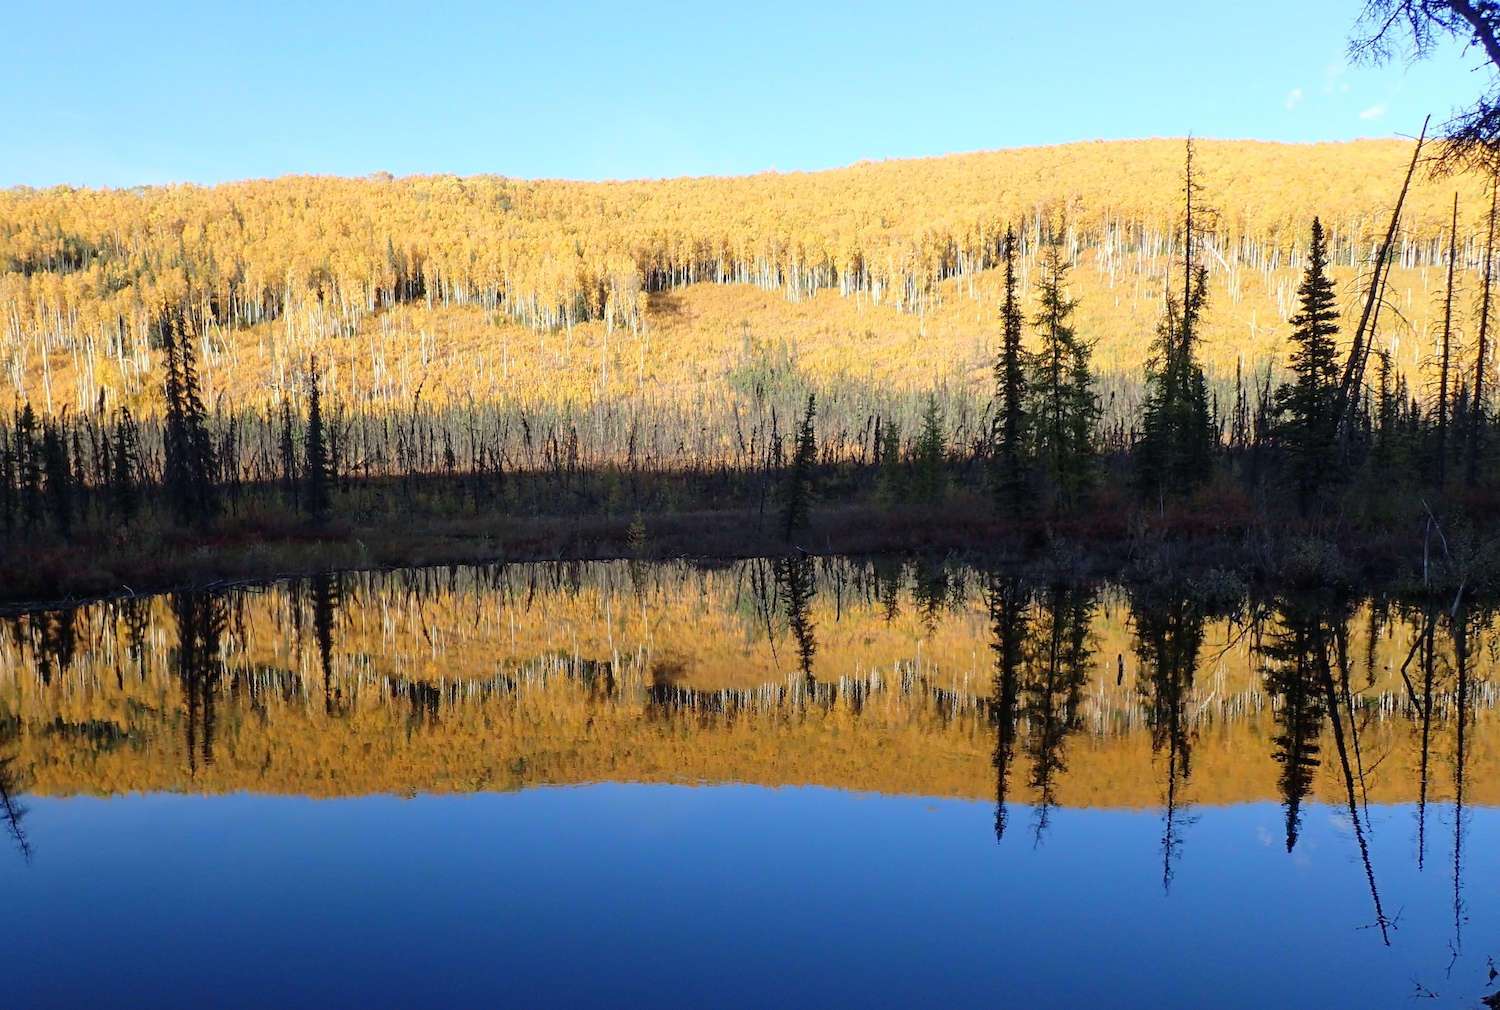 Bright yellow leaves in sunshine cover a distant hillside and are reflected in a shadowed pond in the foreground.